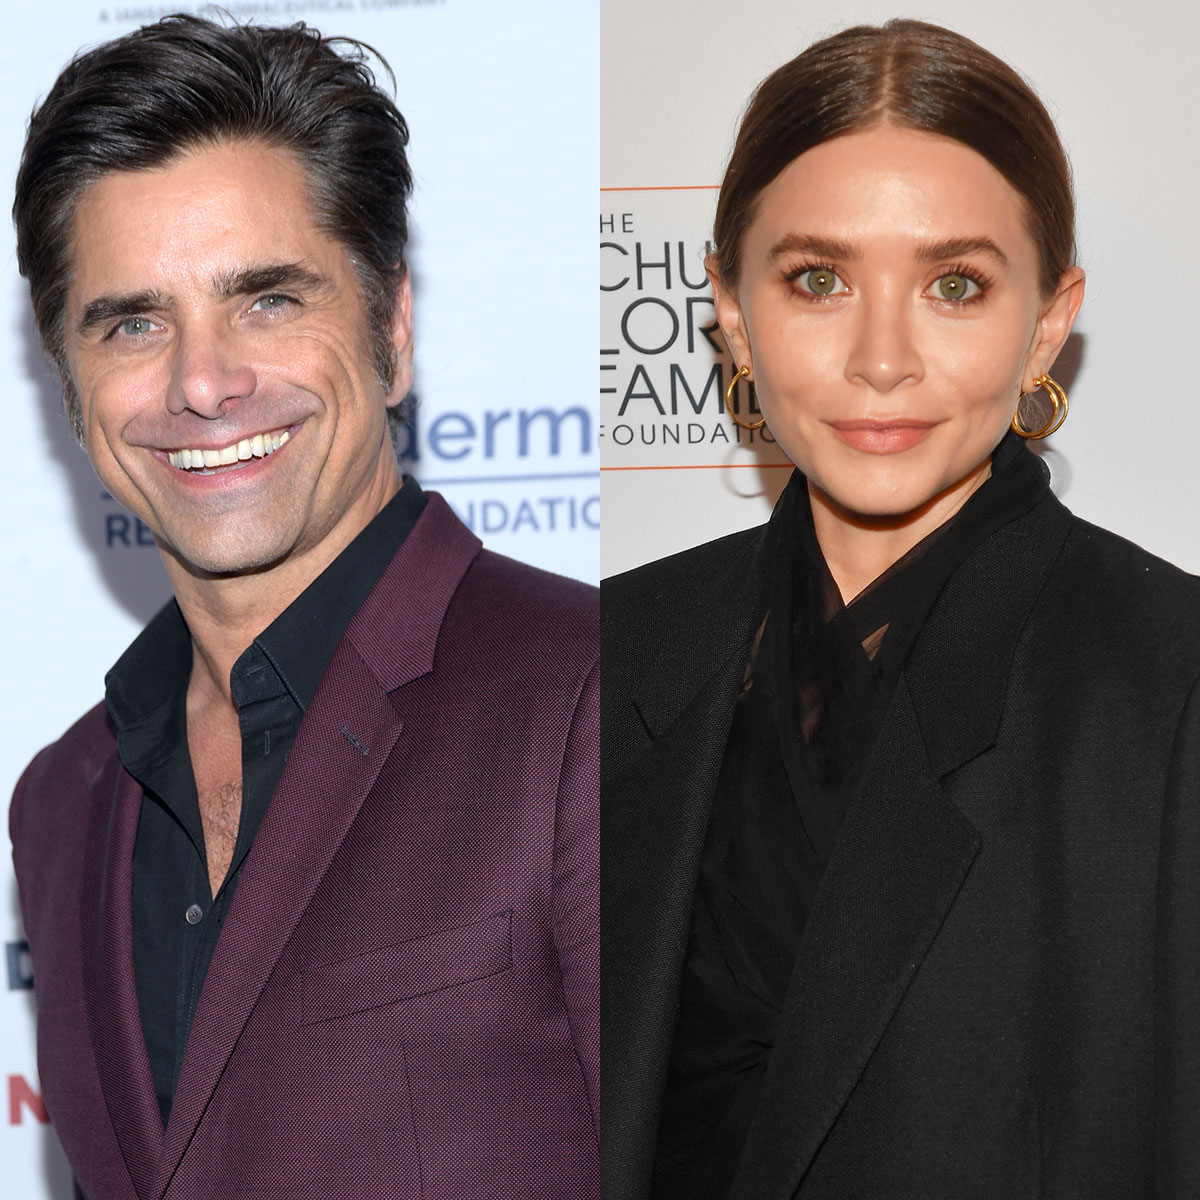 John Stamos’ Note to New Mom Ashley Olsen Will Give You a Full Heart